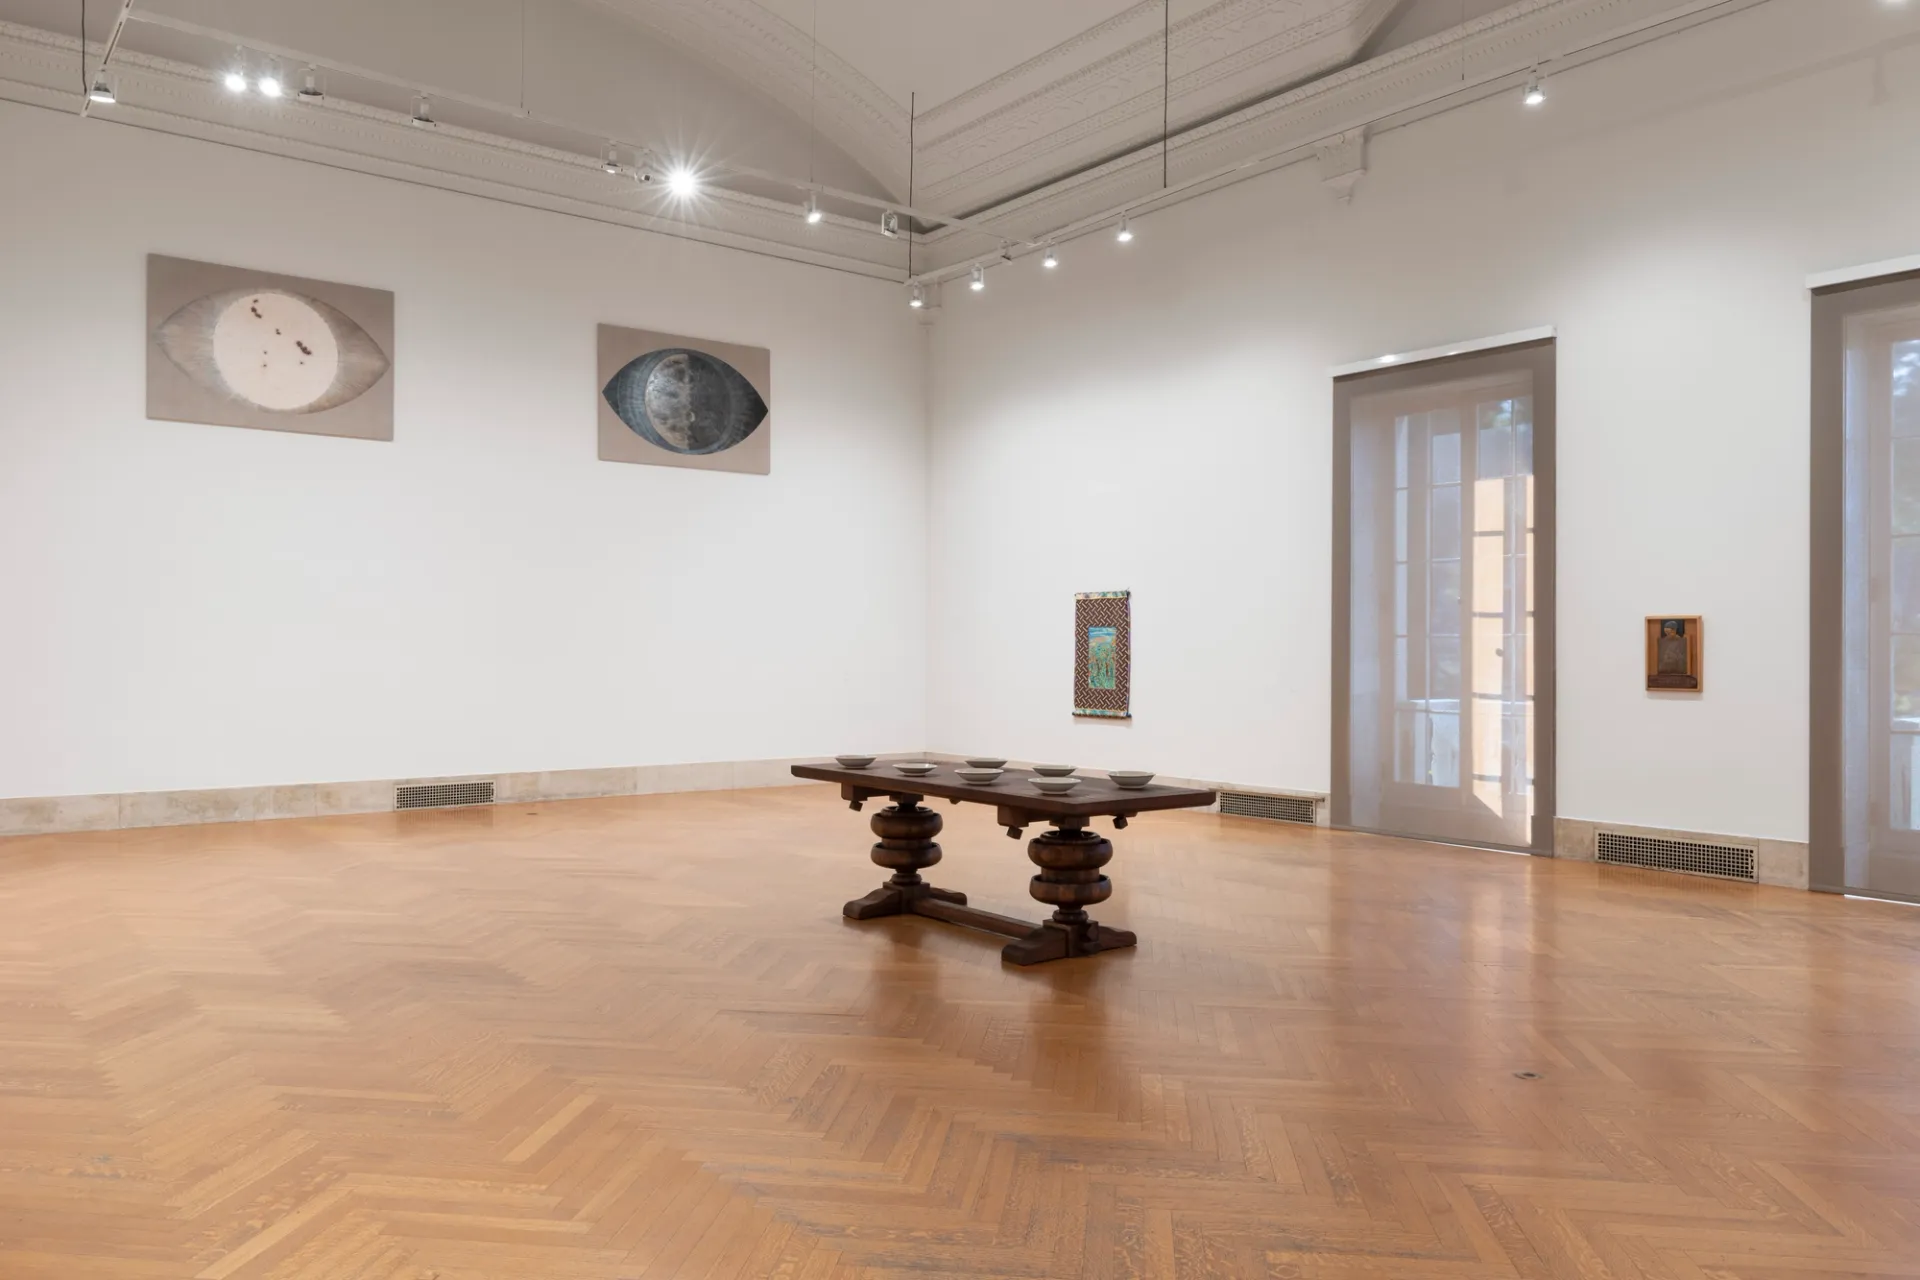 A carved wooden table supporting a group of small ceramic sculptures stands in the center of a space. To the left, two artworks are positioned high on the wall. To the right, two artworks are on the wall on either side of a large window.